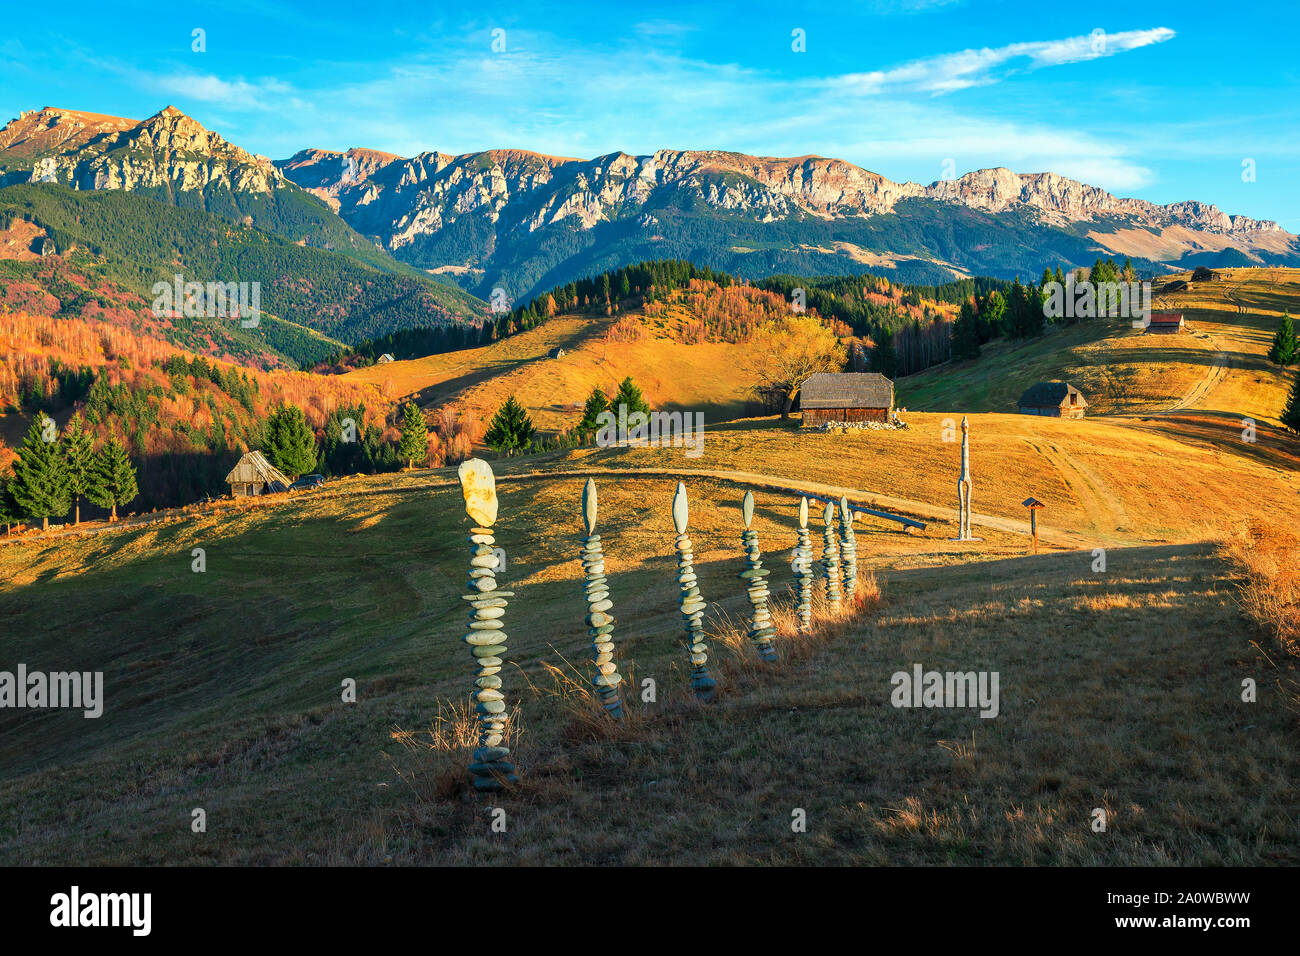 Picturesque colorful autumn countryside landscape with rural wooden huts and high mountains in background, Bran, Transylvania, Romania, Europe Stock Photo